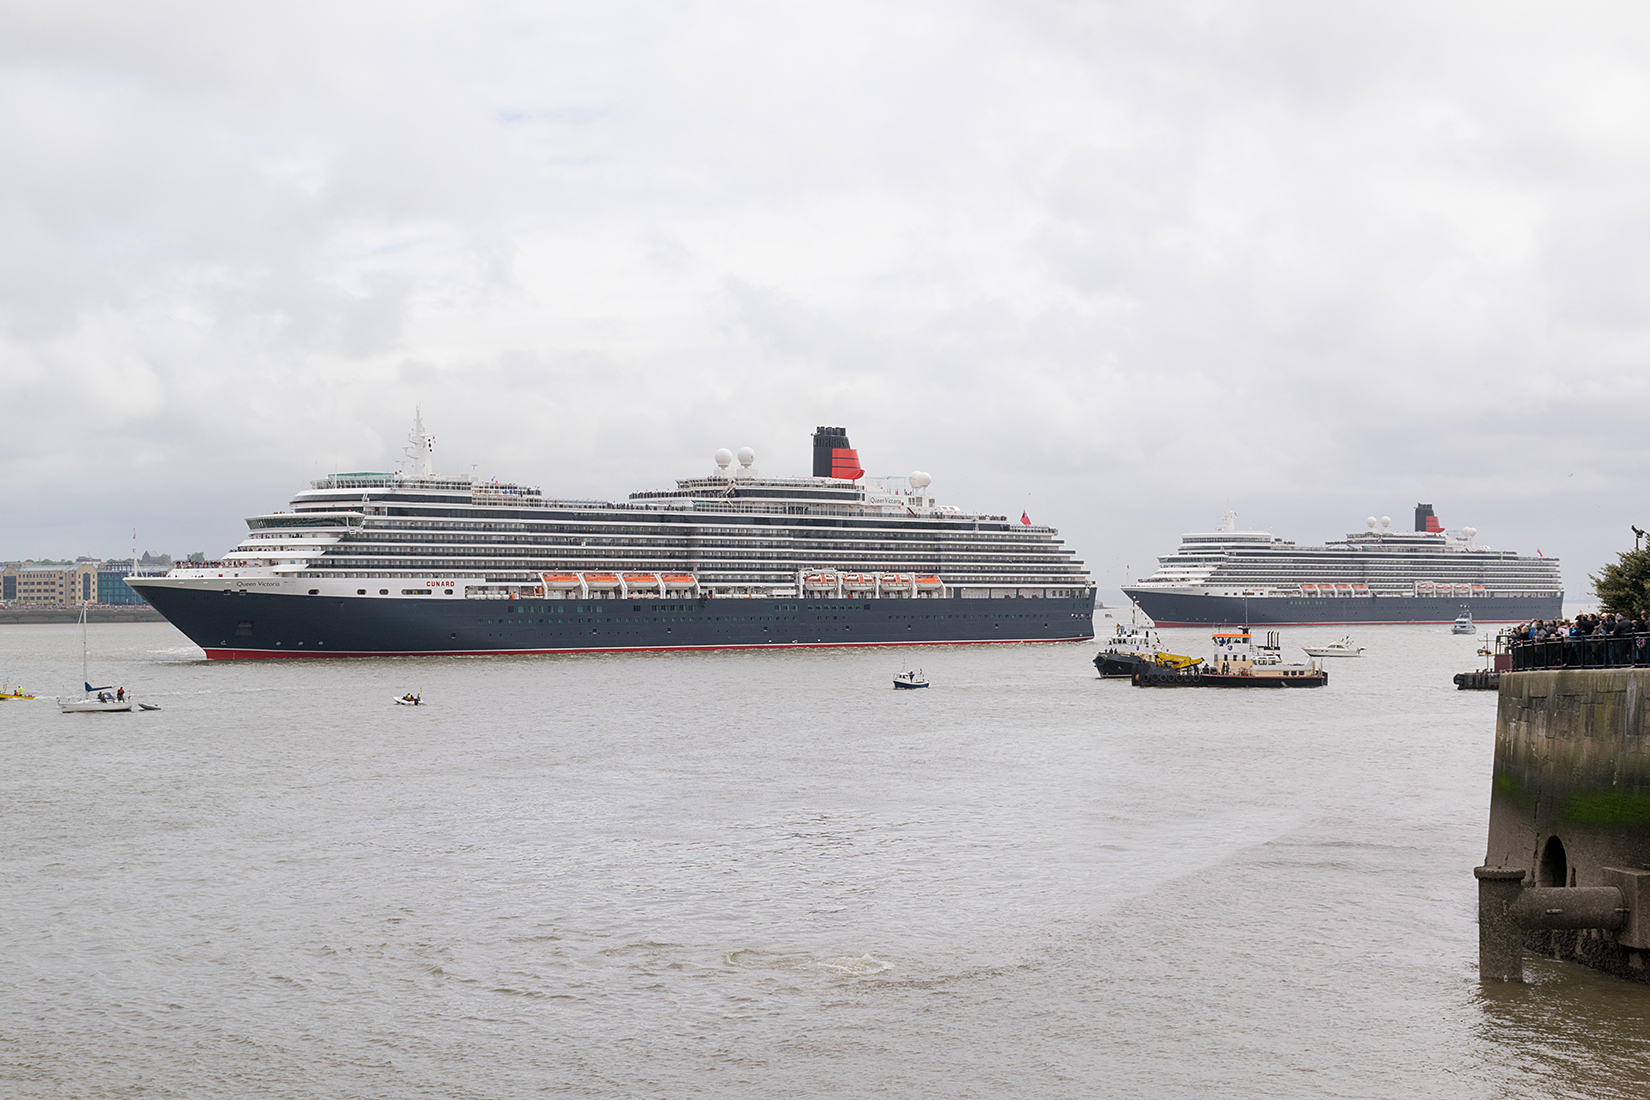 Manouvers completed Queen Victoria and Queen Elizabeth move forward